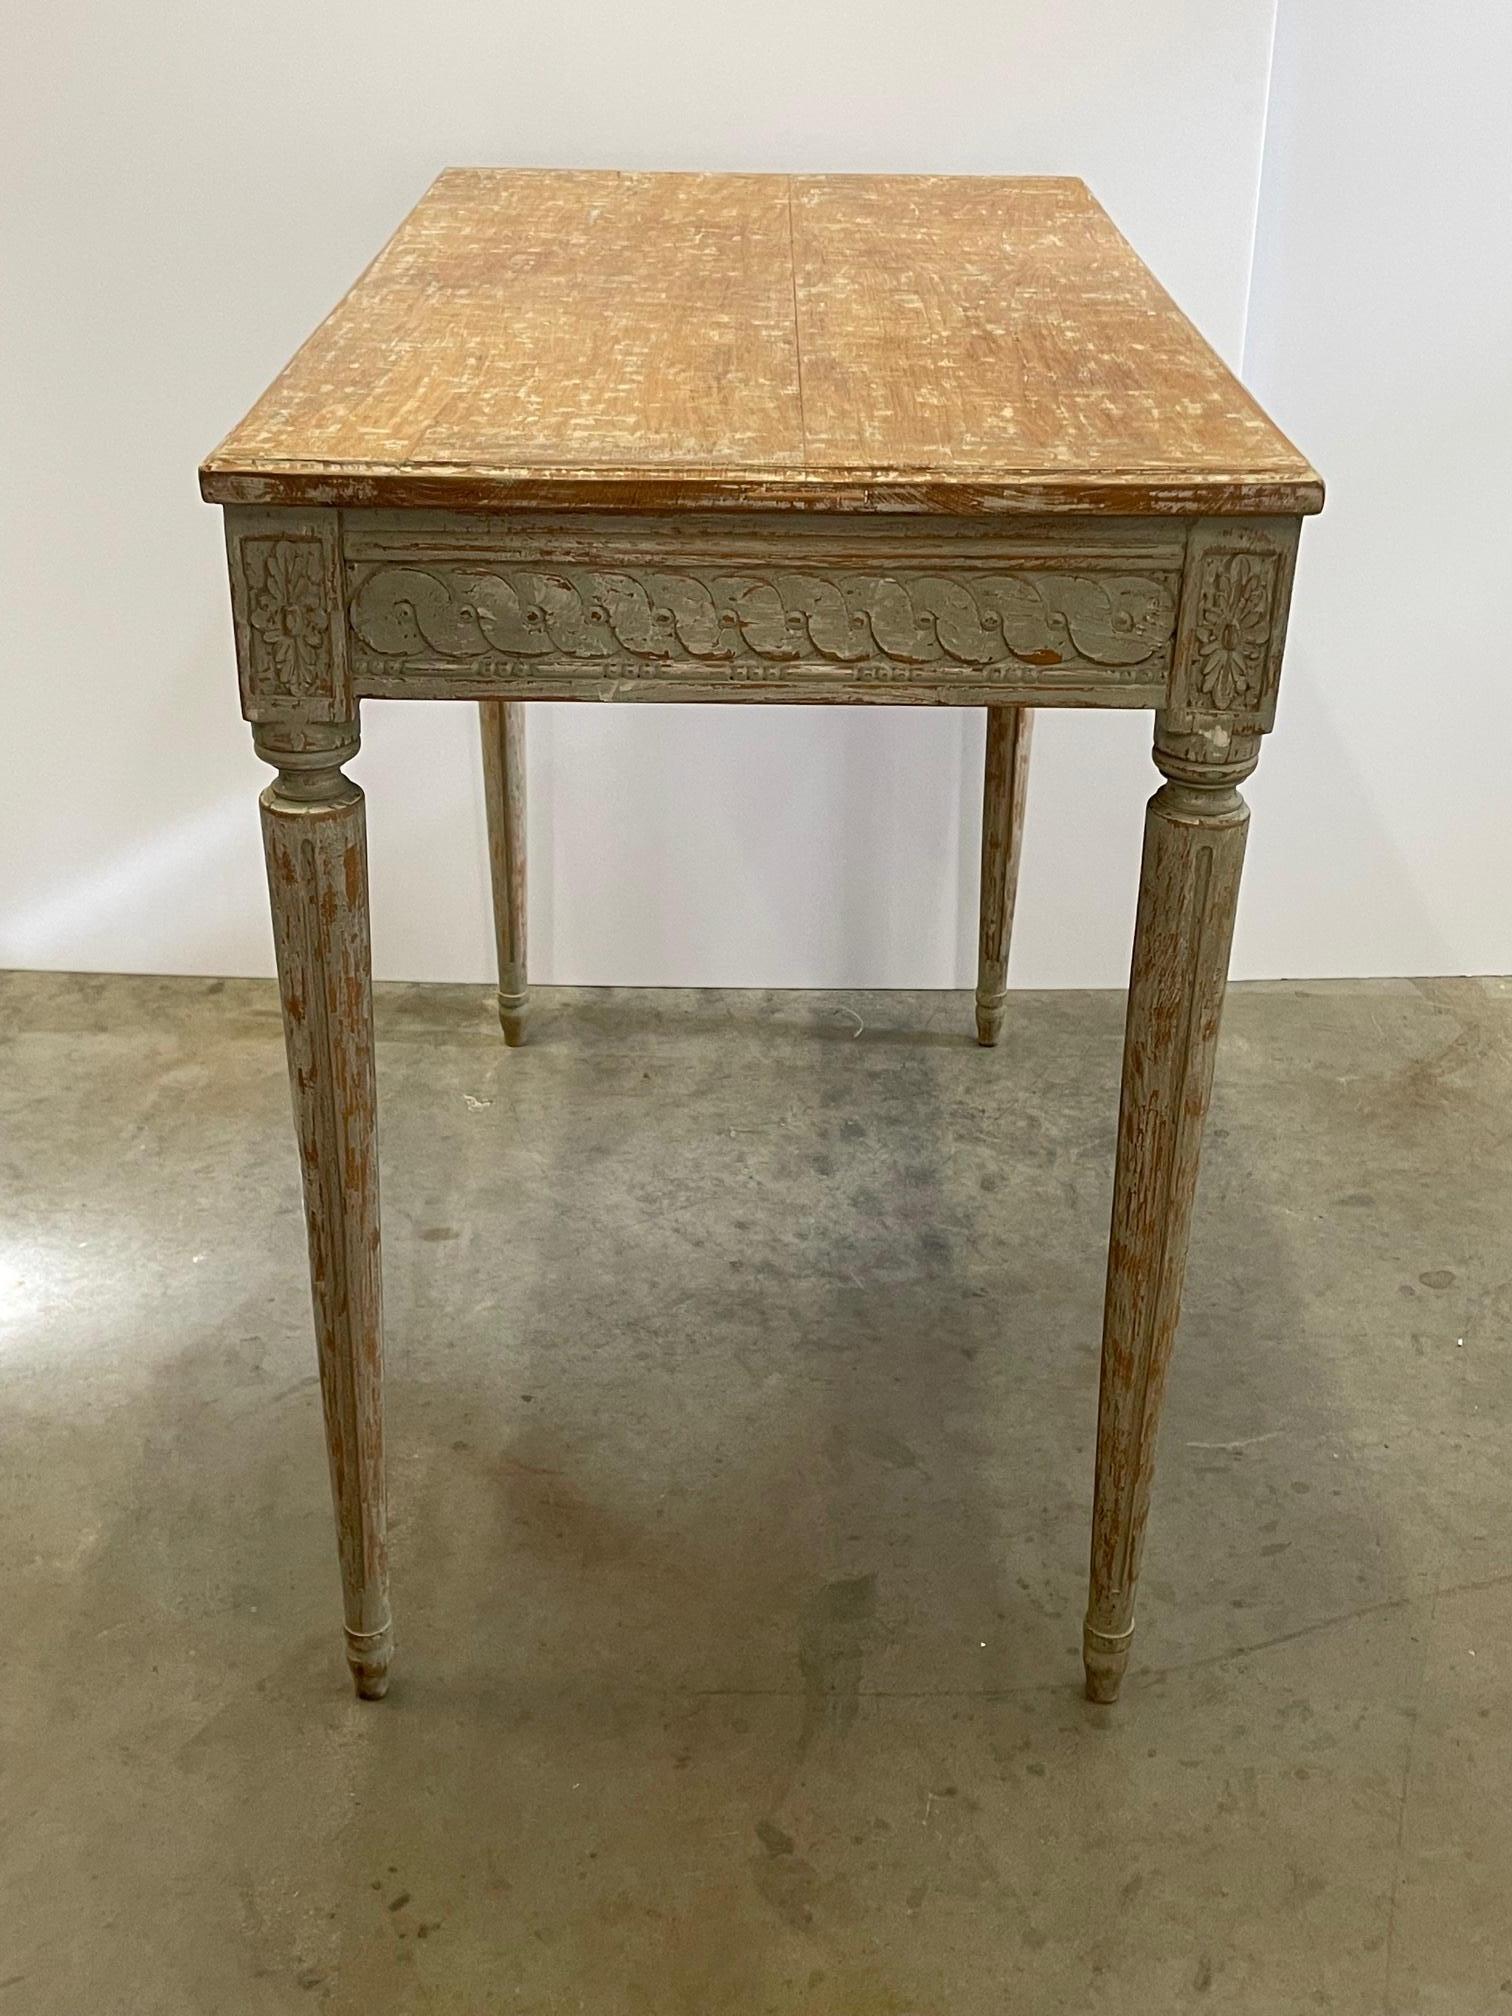 A lovely console table or writing desk of carved wood having a painted light green antique patina with a rubbed finish top, single drawer and tapered reeded legs.
Opening is 25